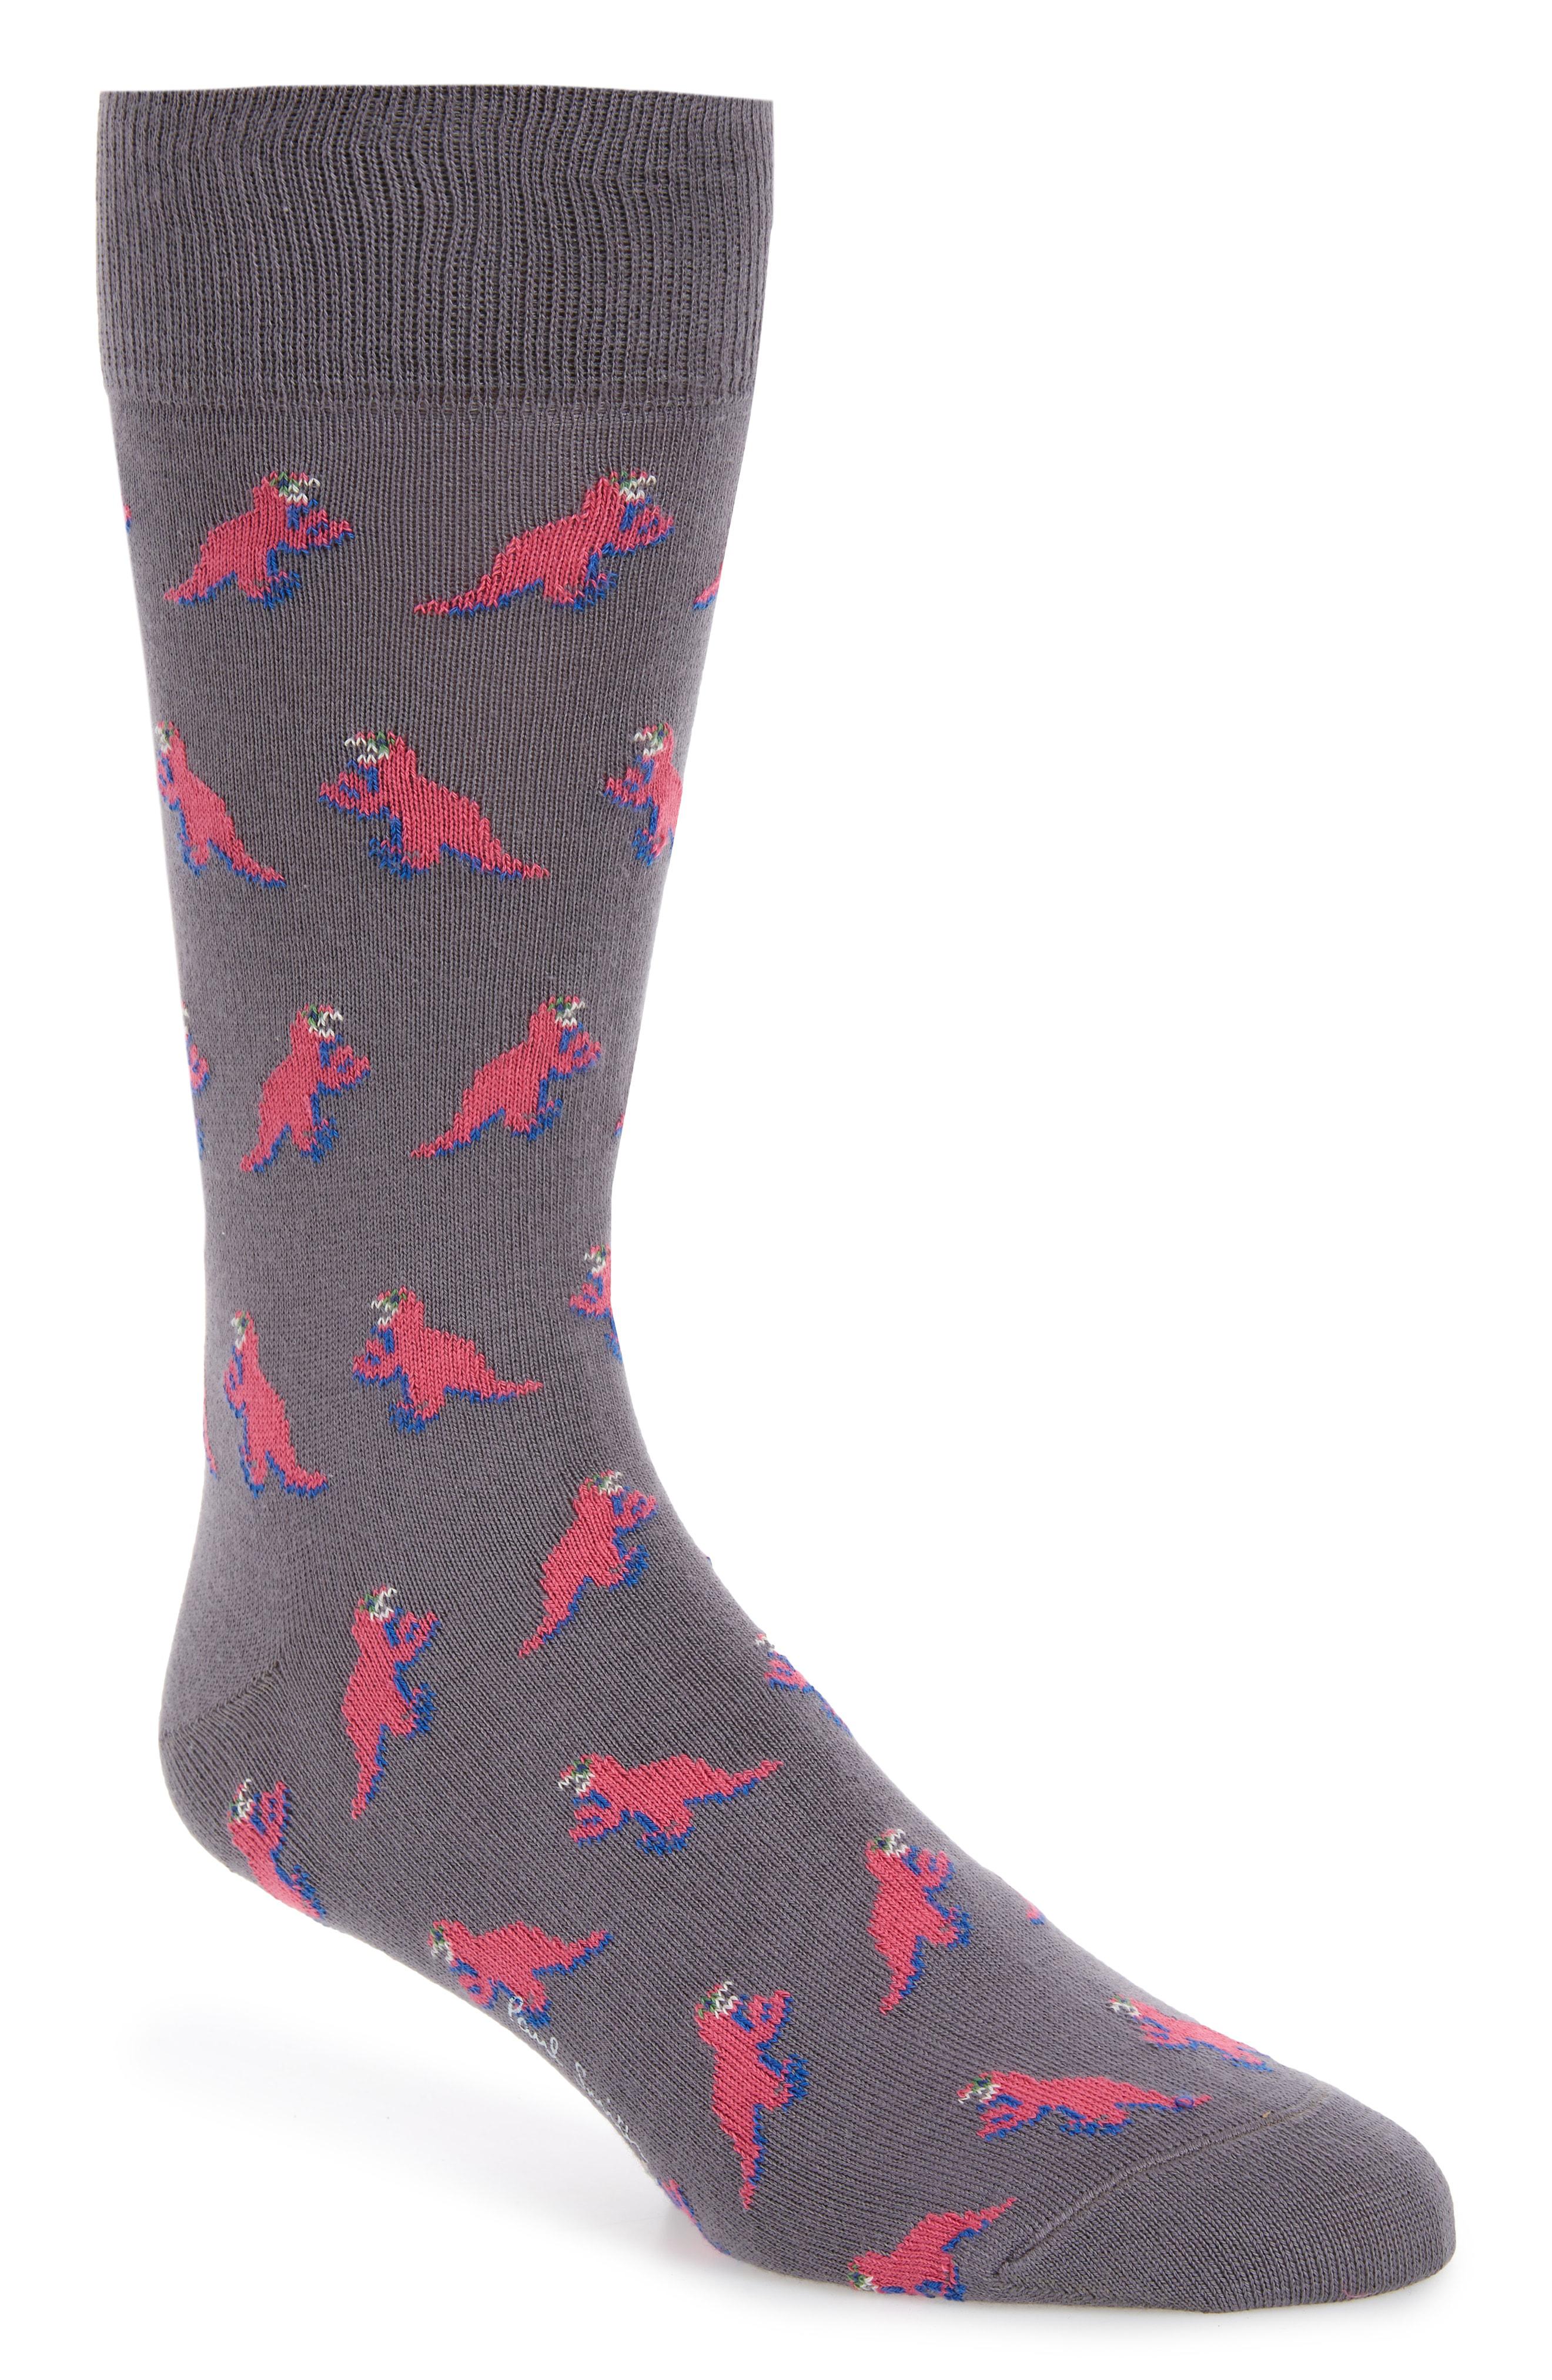 Why are Cheap Jacquard socks for home users popular in the fashion industry